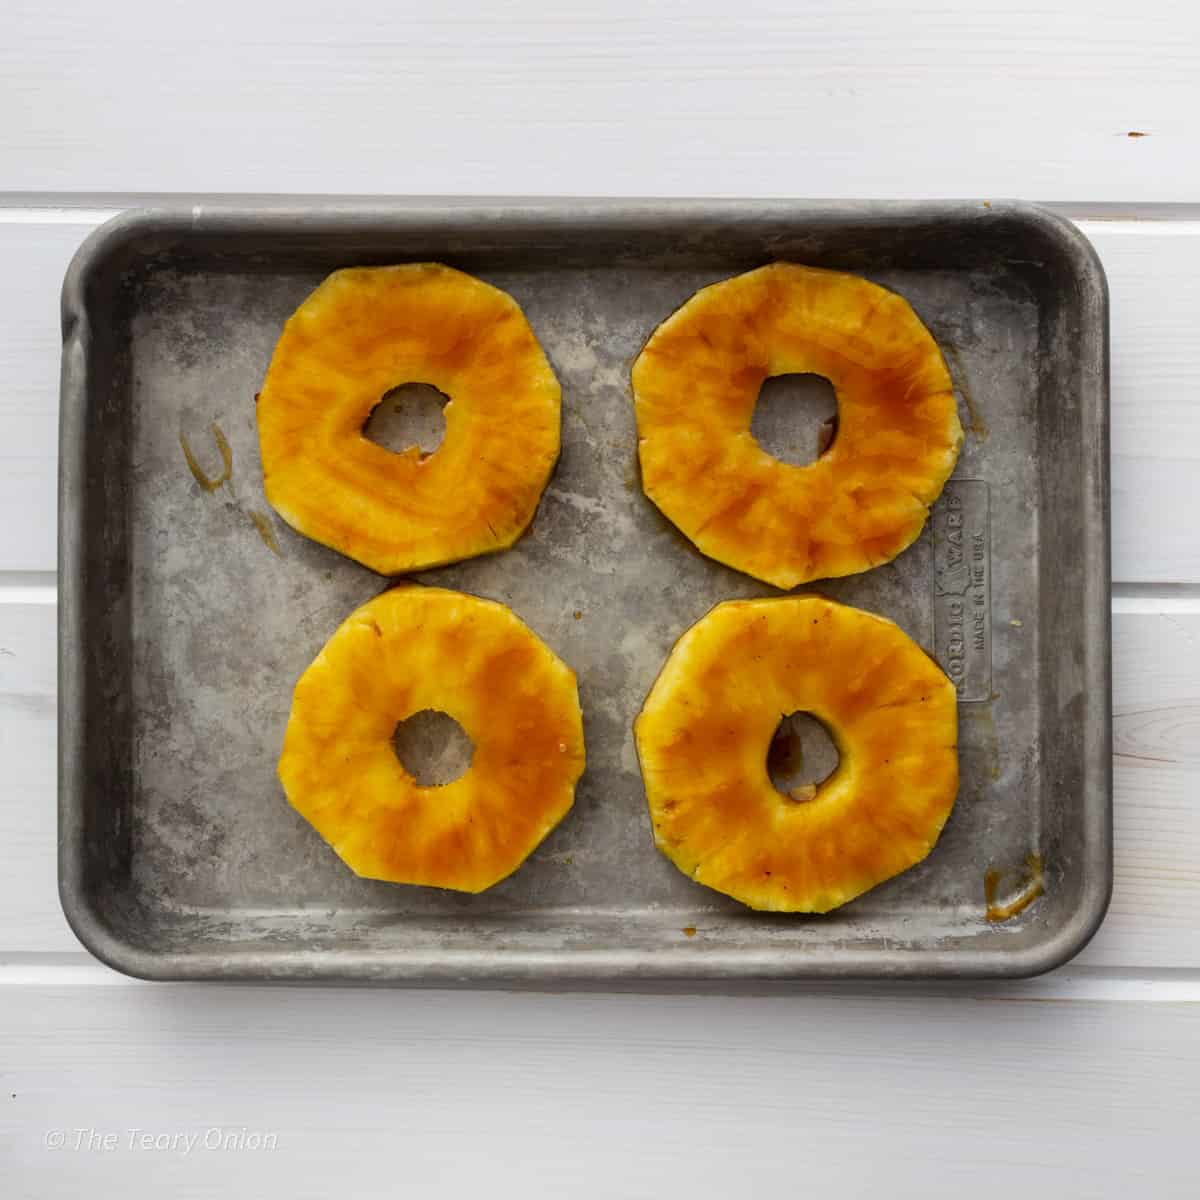 4 fresh pineapple rings on a tray brushed with teriyaki sauce.